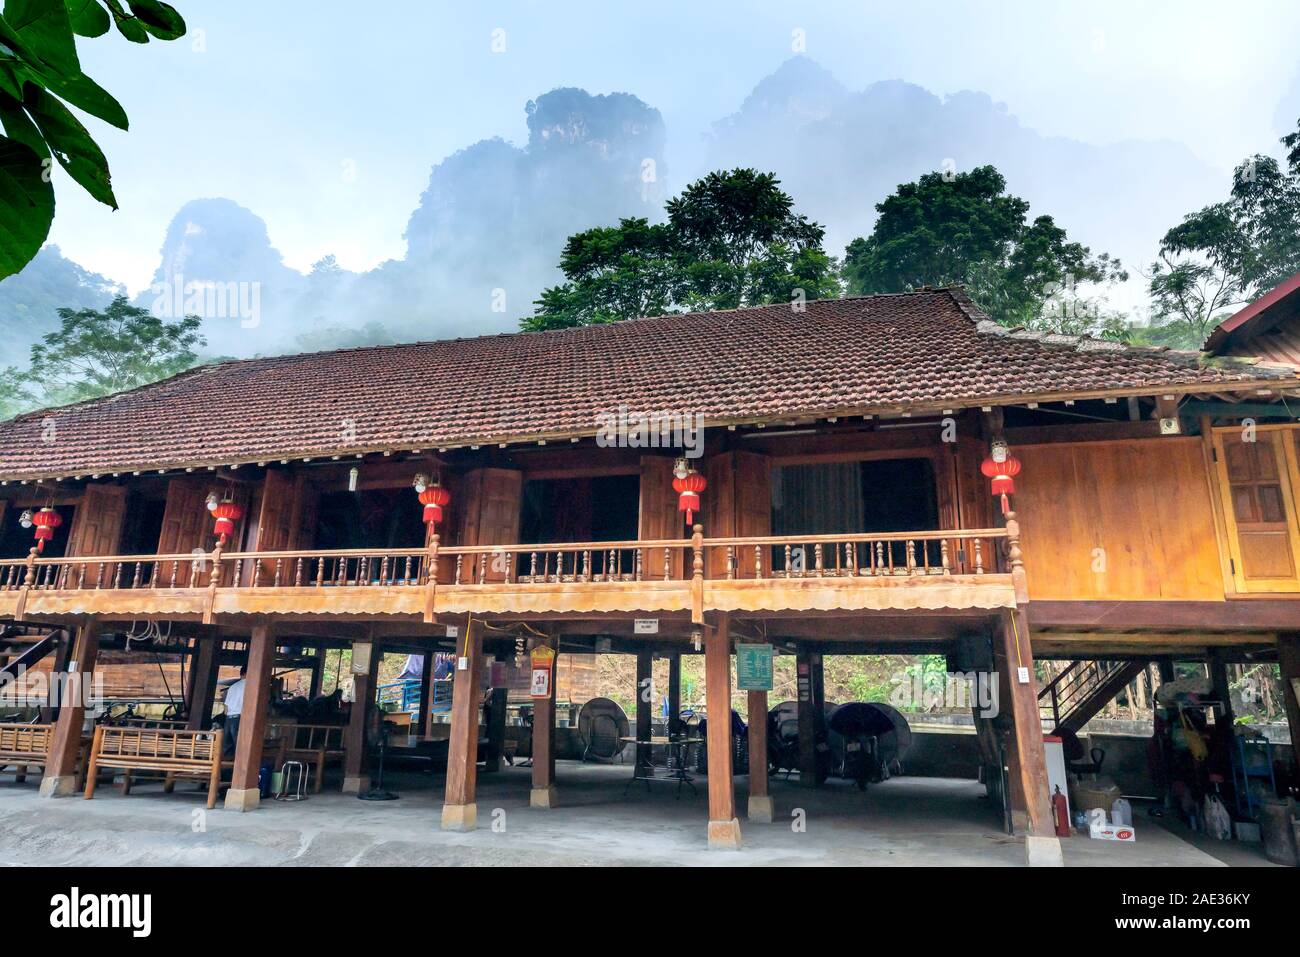 Thuong Lam, Tuyen Quang province, Vietnam - September 16, 2019: Homestay Hoang Tuan. This is a stilt house made entirely of wood by the Dao ethnic peo Stock Photo